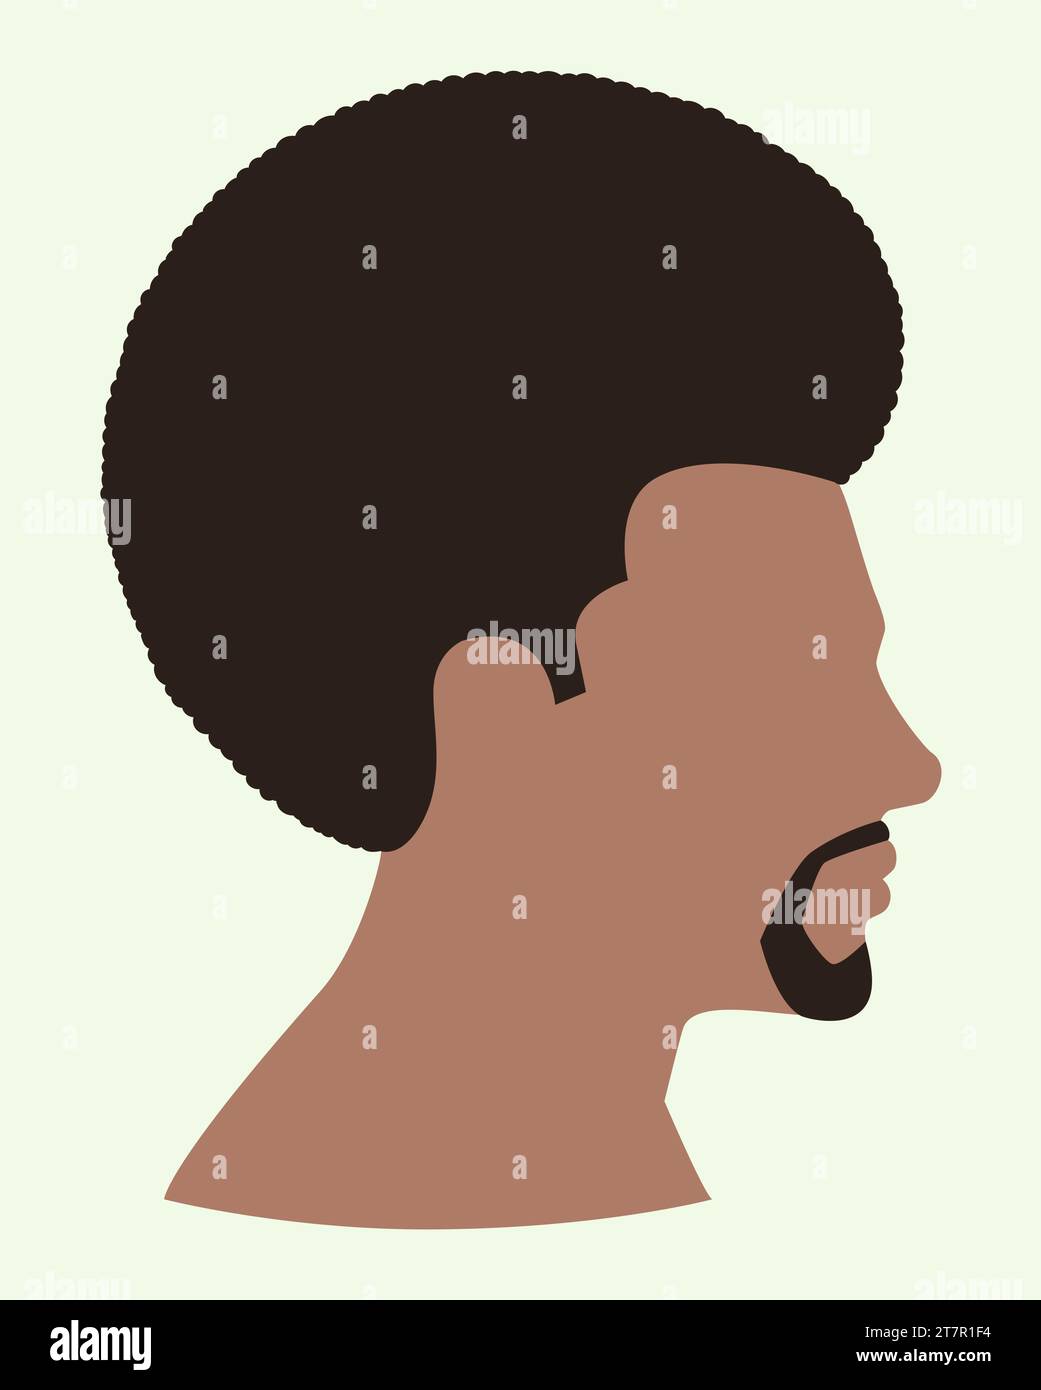 Simple flat vector illustration of side view of black man face with afro hair Stock Vector